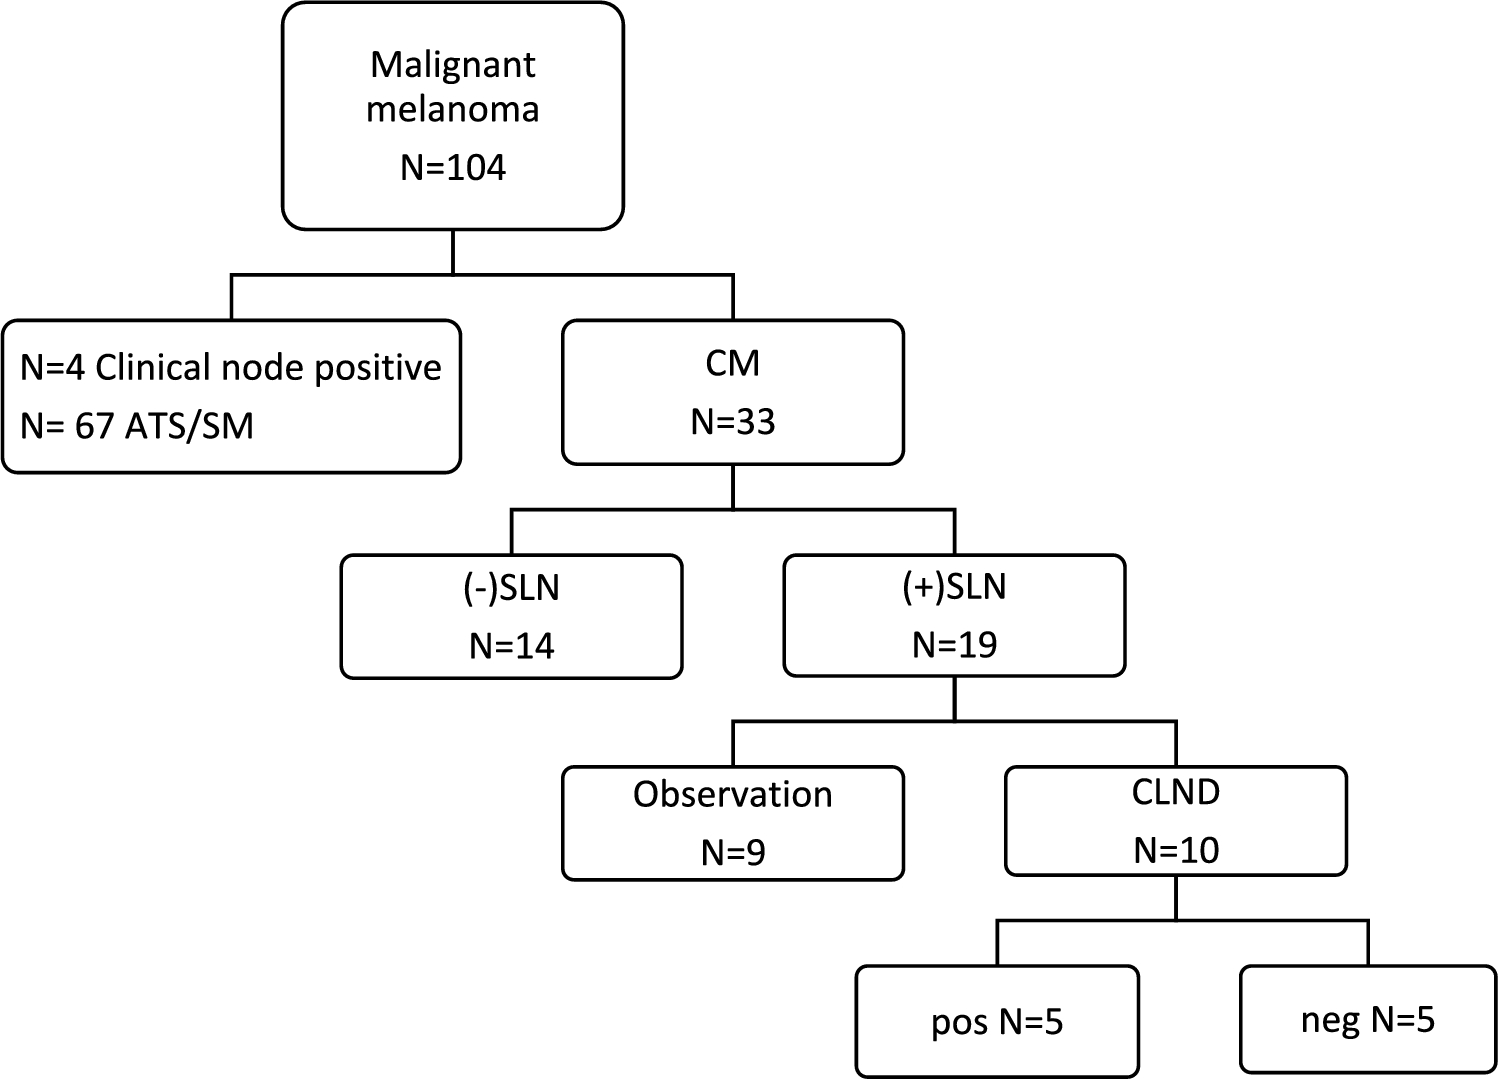 Regional lymph node evaluation in pediatric conventional melanoma subtype: a single-center 10-year review